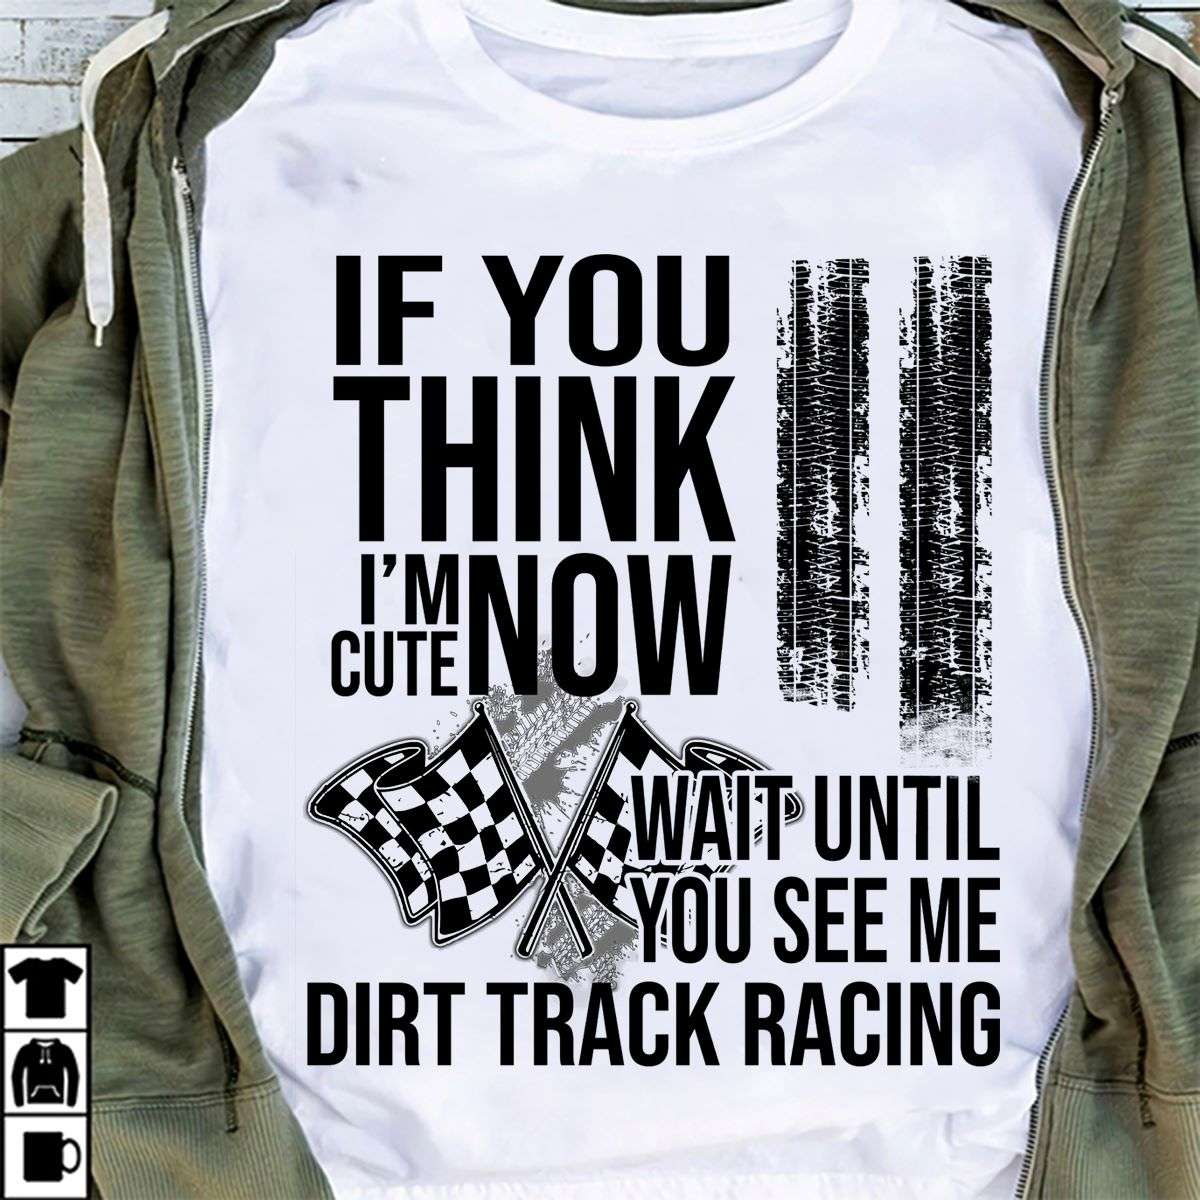 Gift for racer, Love dirt track racing - If you think i'm cute now wait until you see me dirt track racing